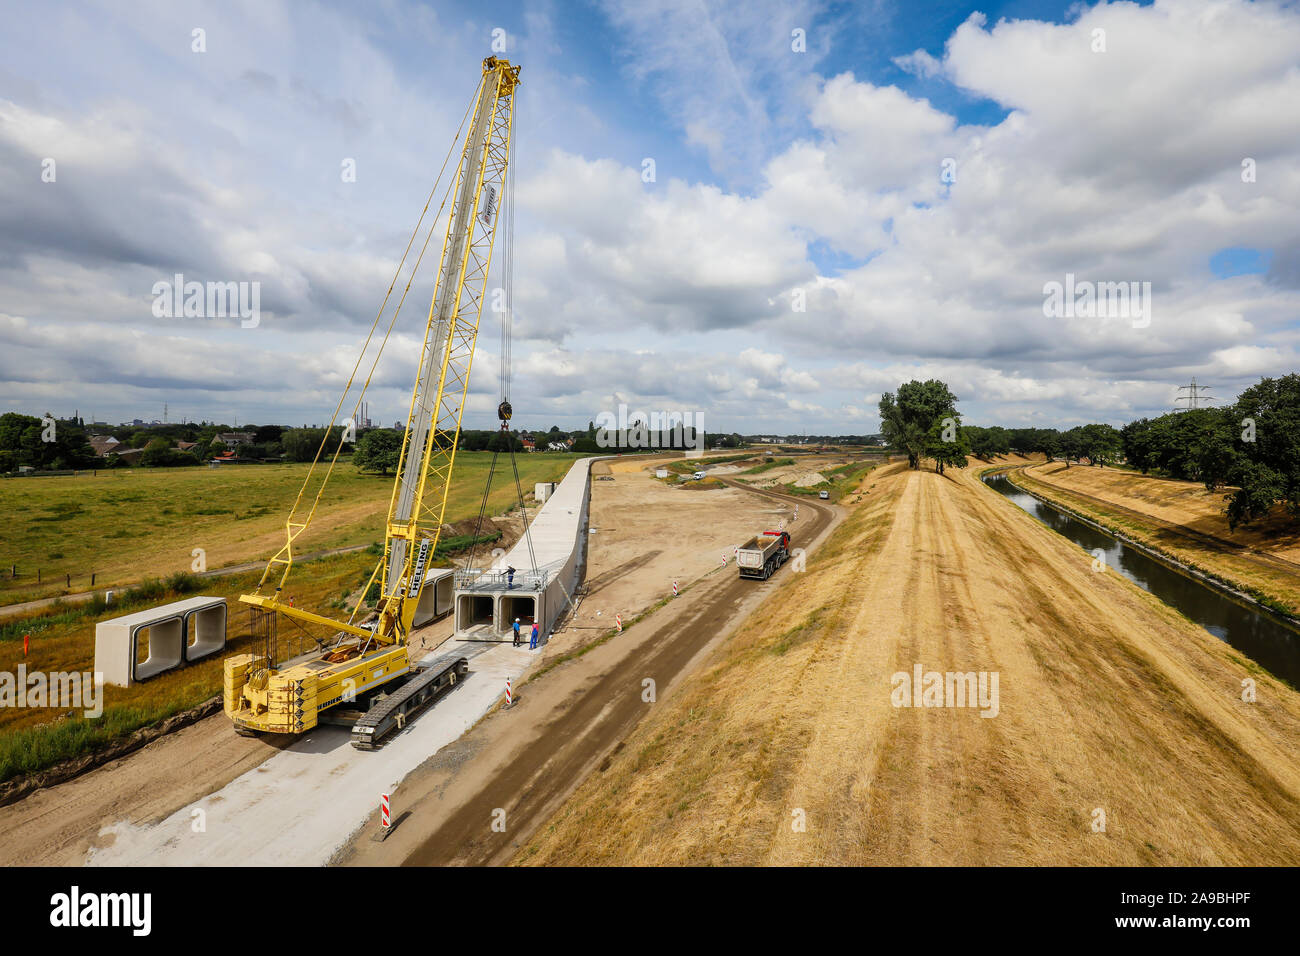 09.07.2019, Oberhausen, North Rhine-Westphalia, Germany - Emscher conversion, new construction of the Emscher sewer AKE, here in the Holtener Feld fra Stock Photo